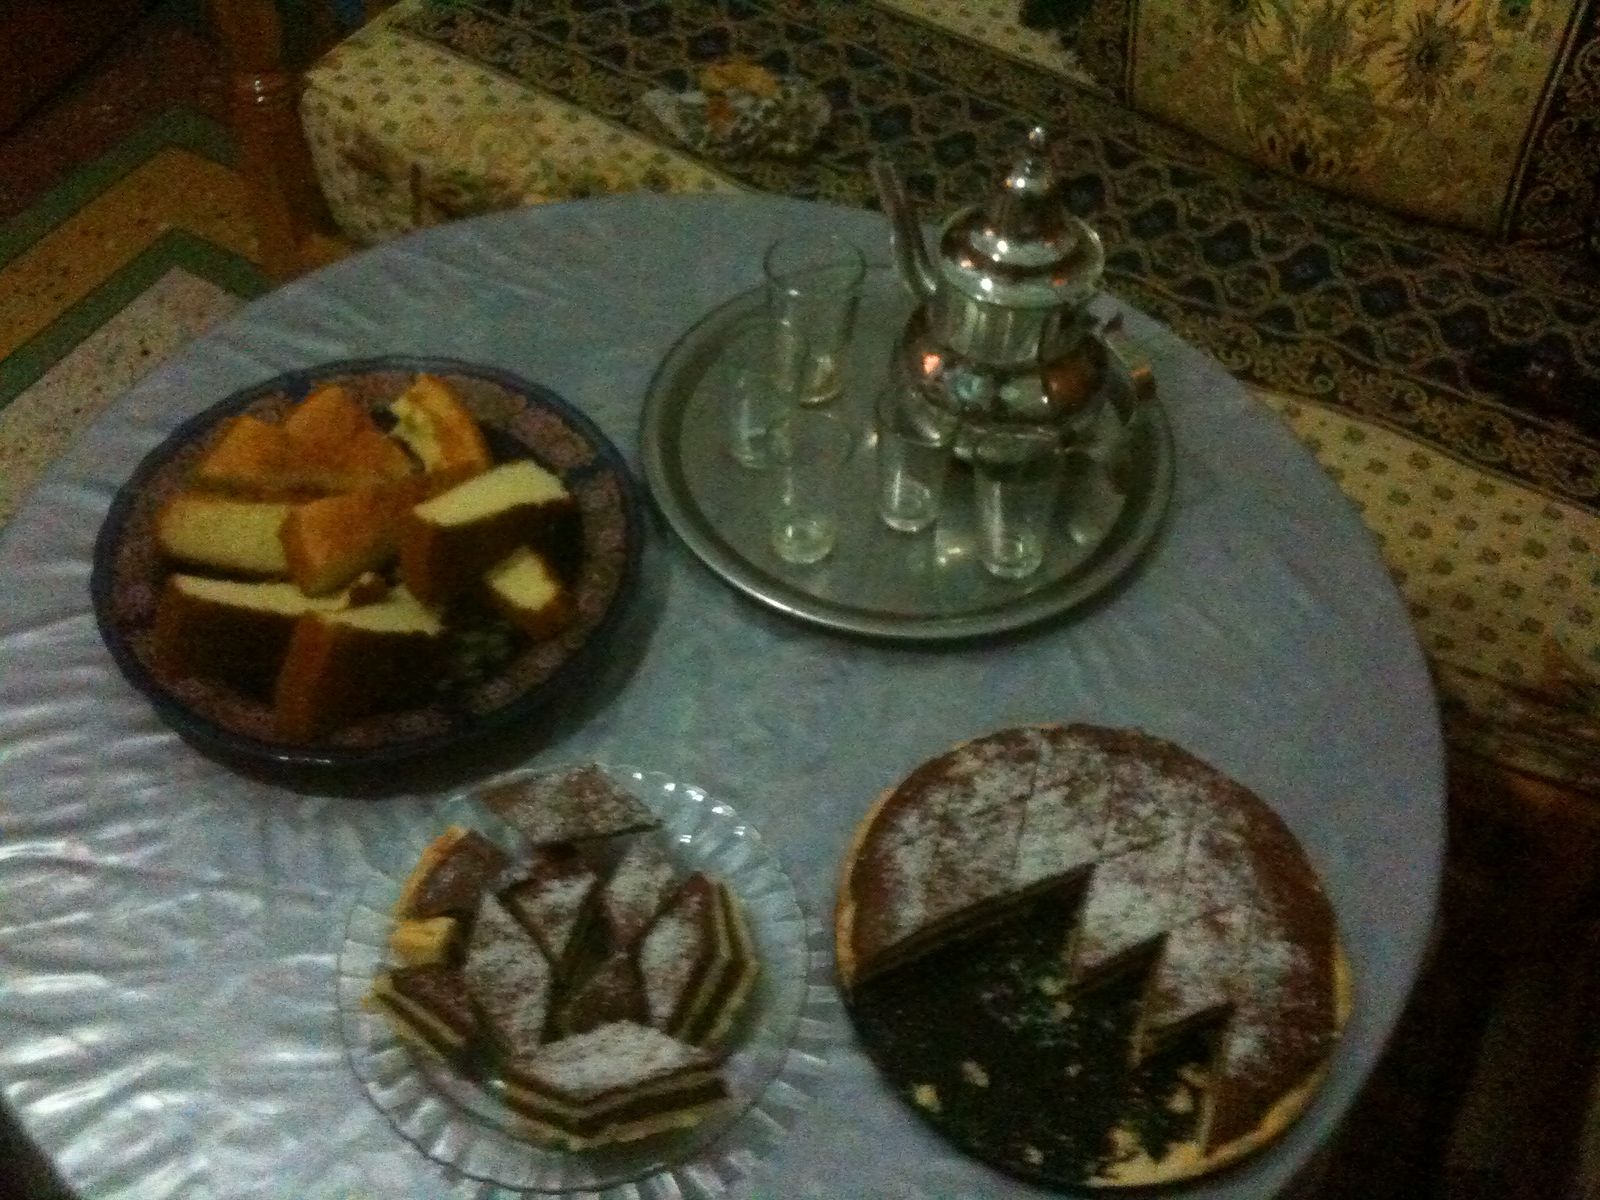 two small plates of pastries with silverware sit on a table next to a tea kettle